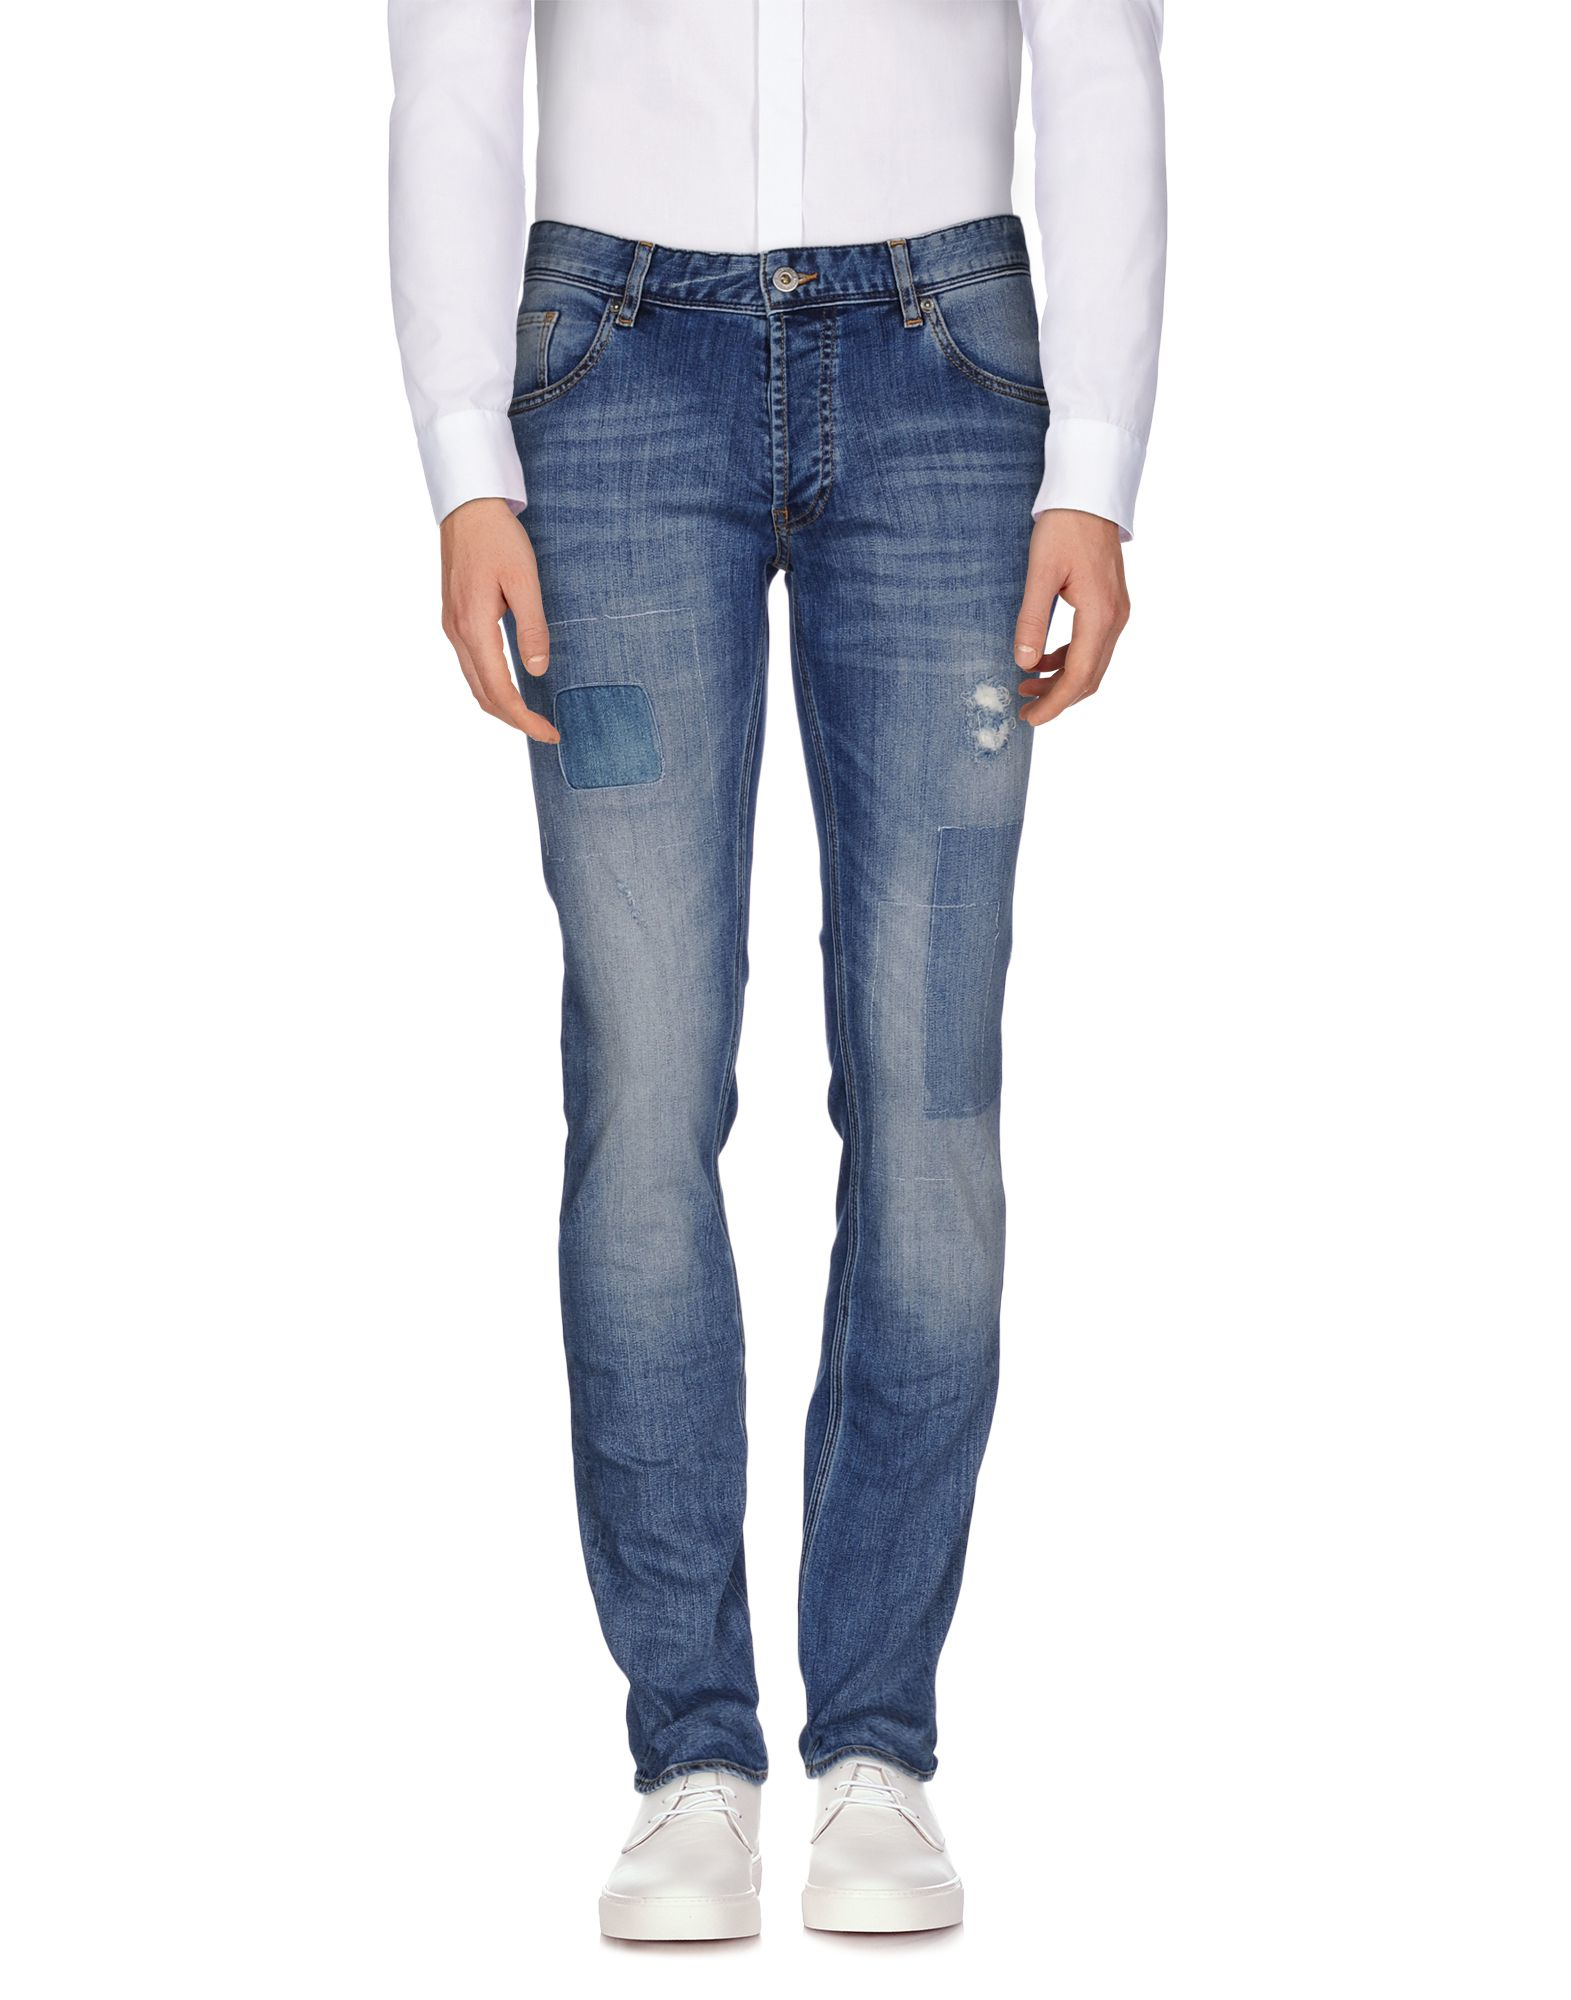 Lyst - Love Moschino Denim Pants in Blue for Men